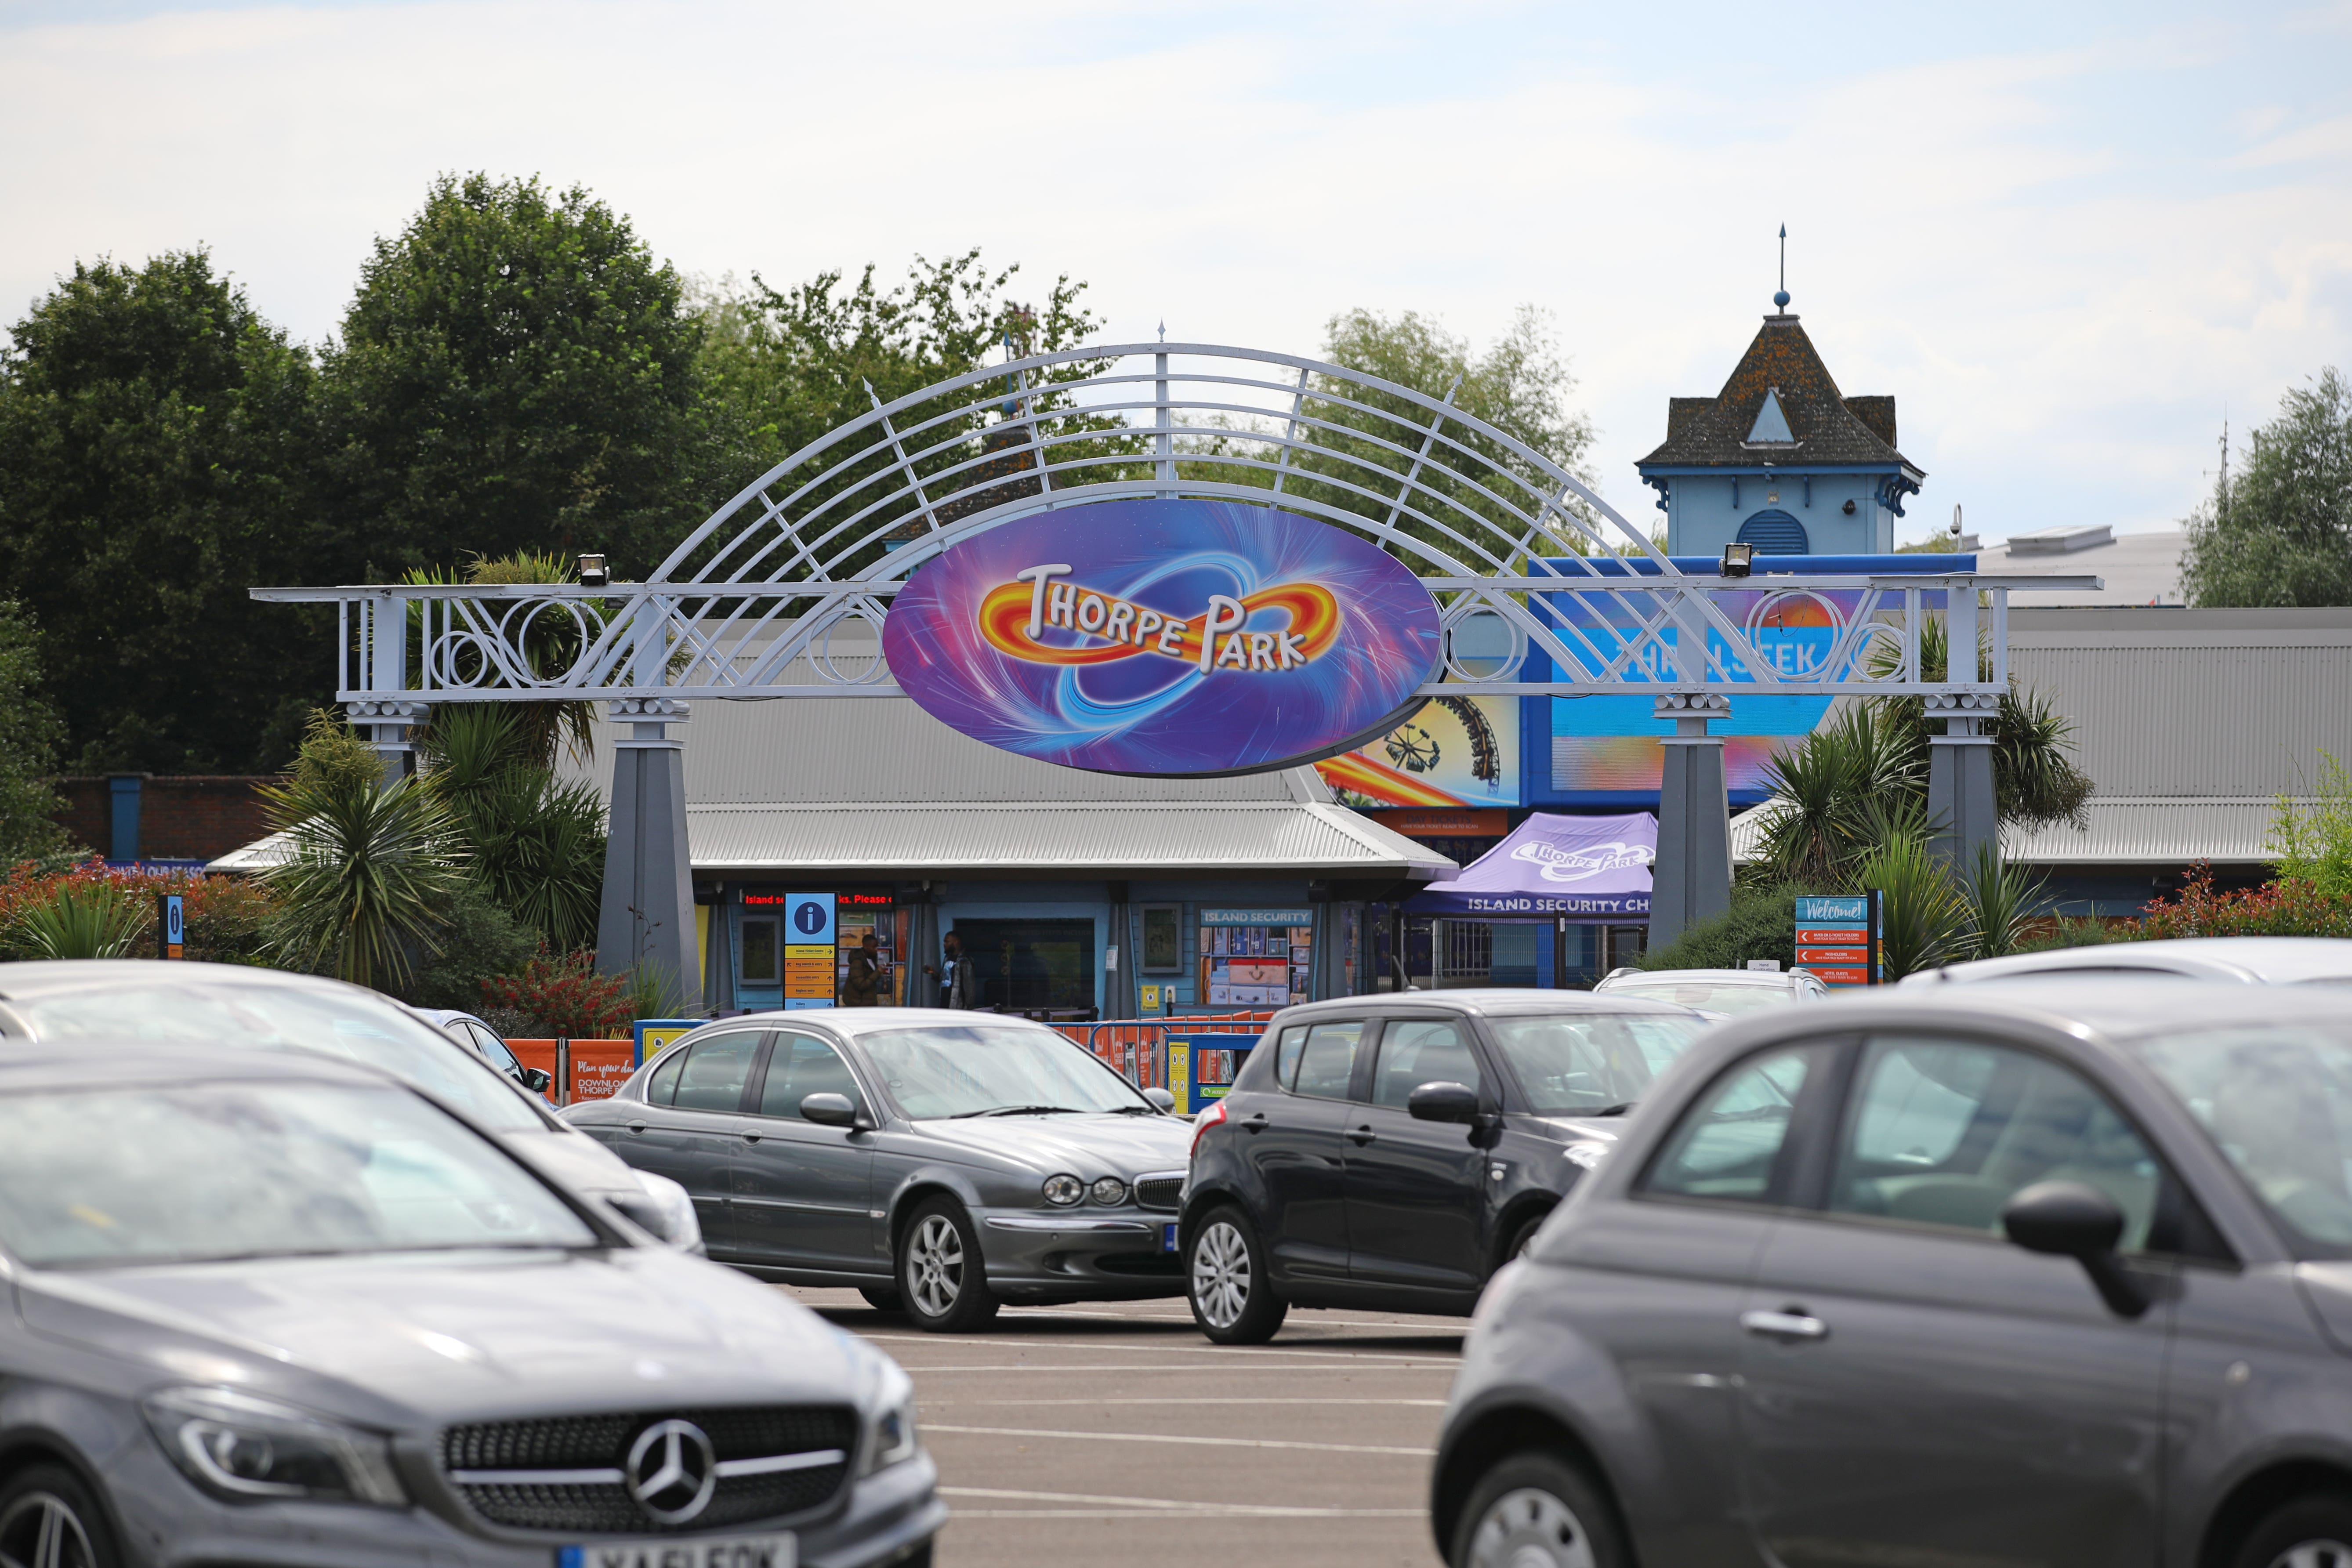 The children disappeared after leaving Thorpe Park in Surrey (PA)